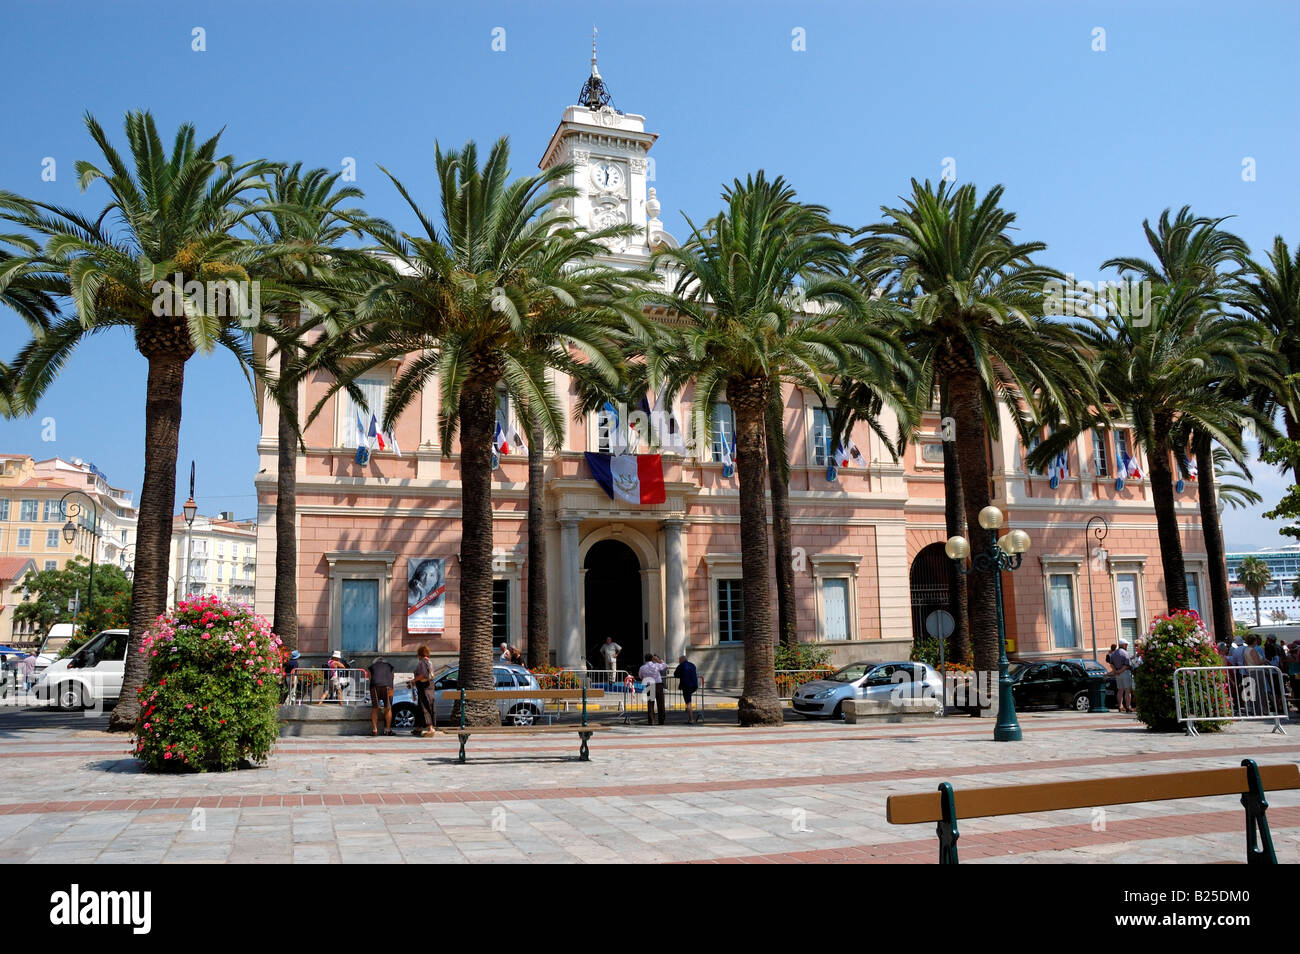 The Pink Town Hall partly hidden behind Palm Trees in Square Foch, Ajaccio Stock Photo